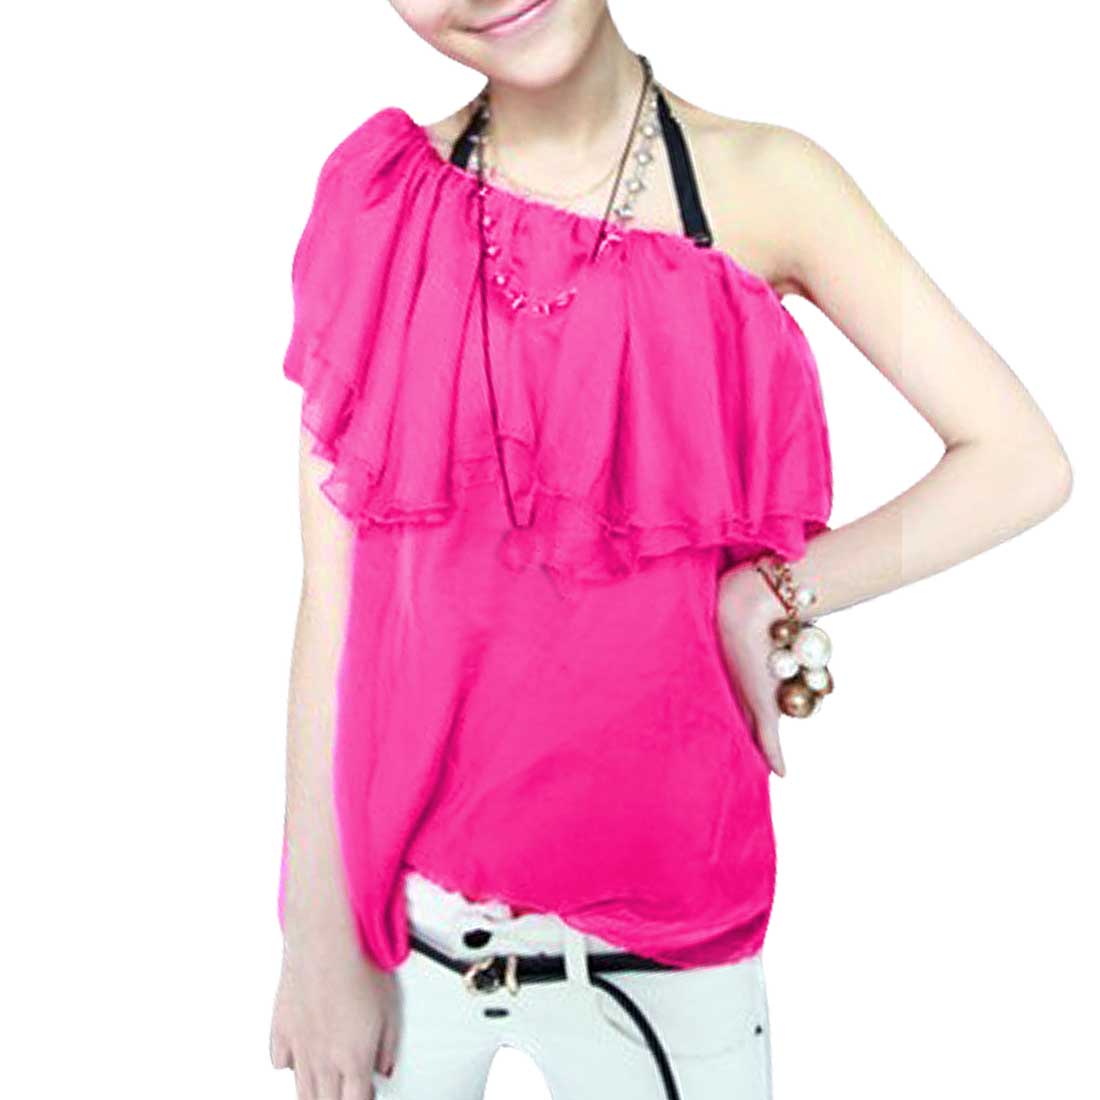 Unique Bargains Lady Sinlge Shoulder Layered Flouncing Top Summer Tops Shirts Fuchsia S